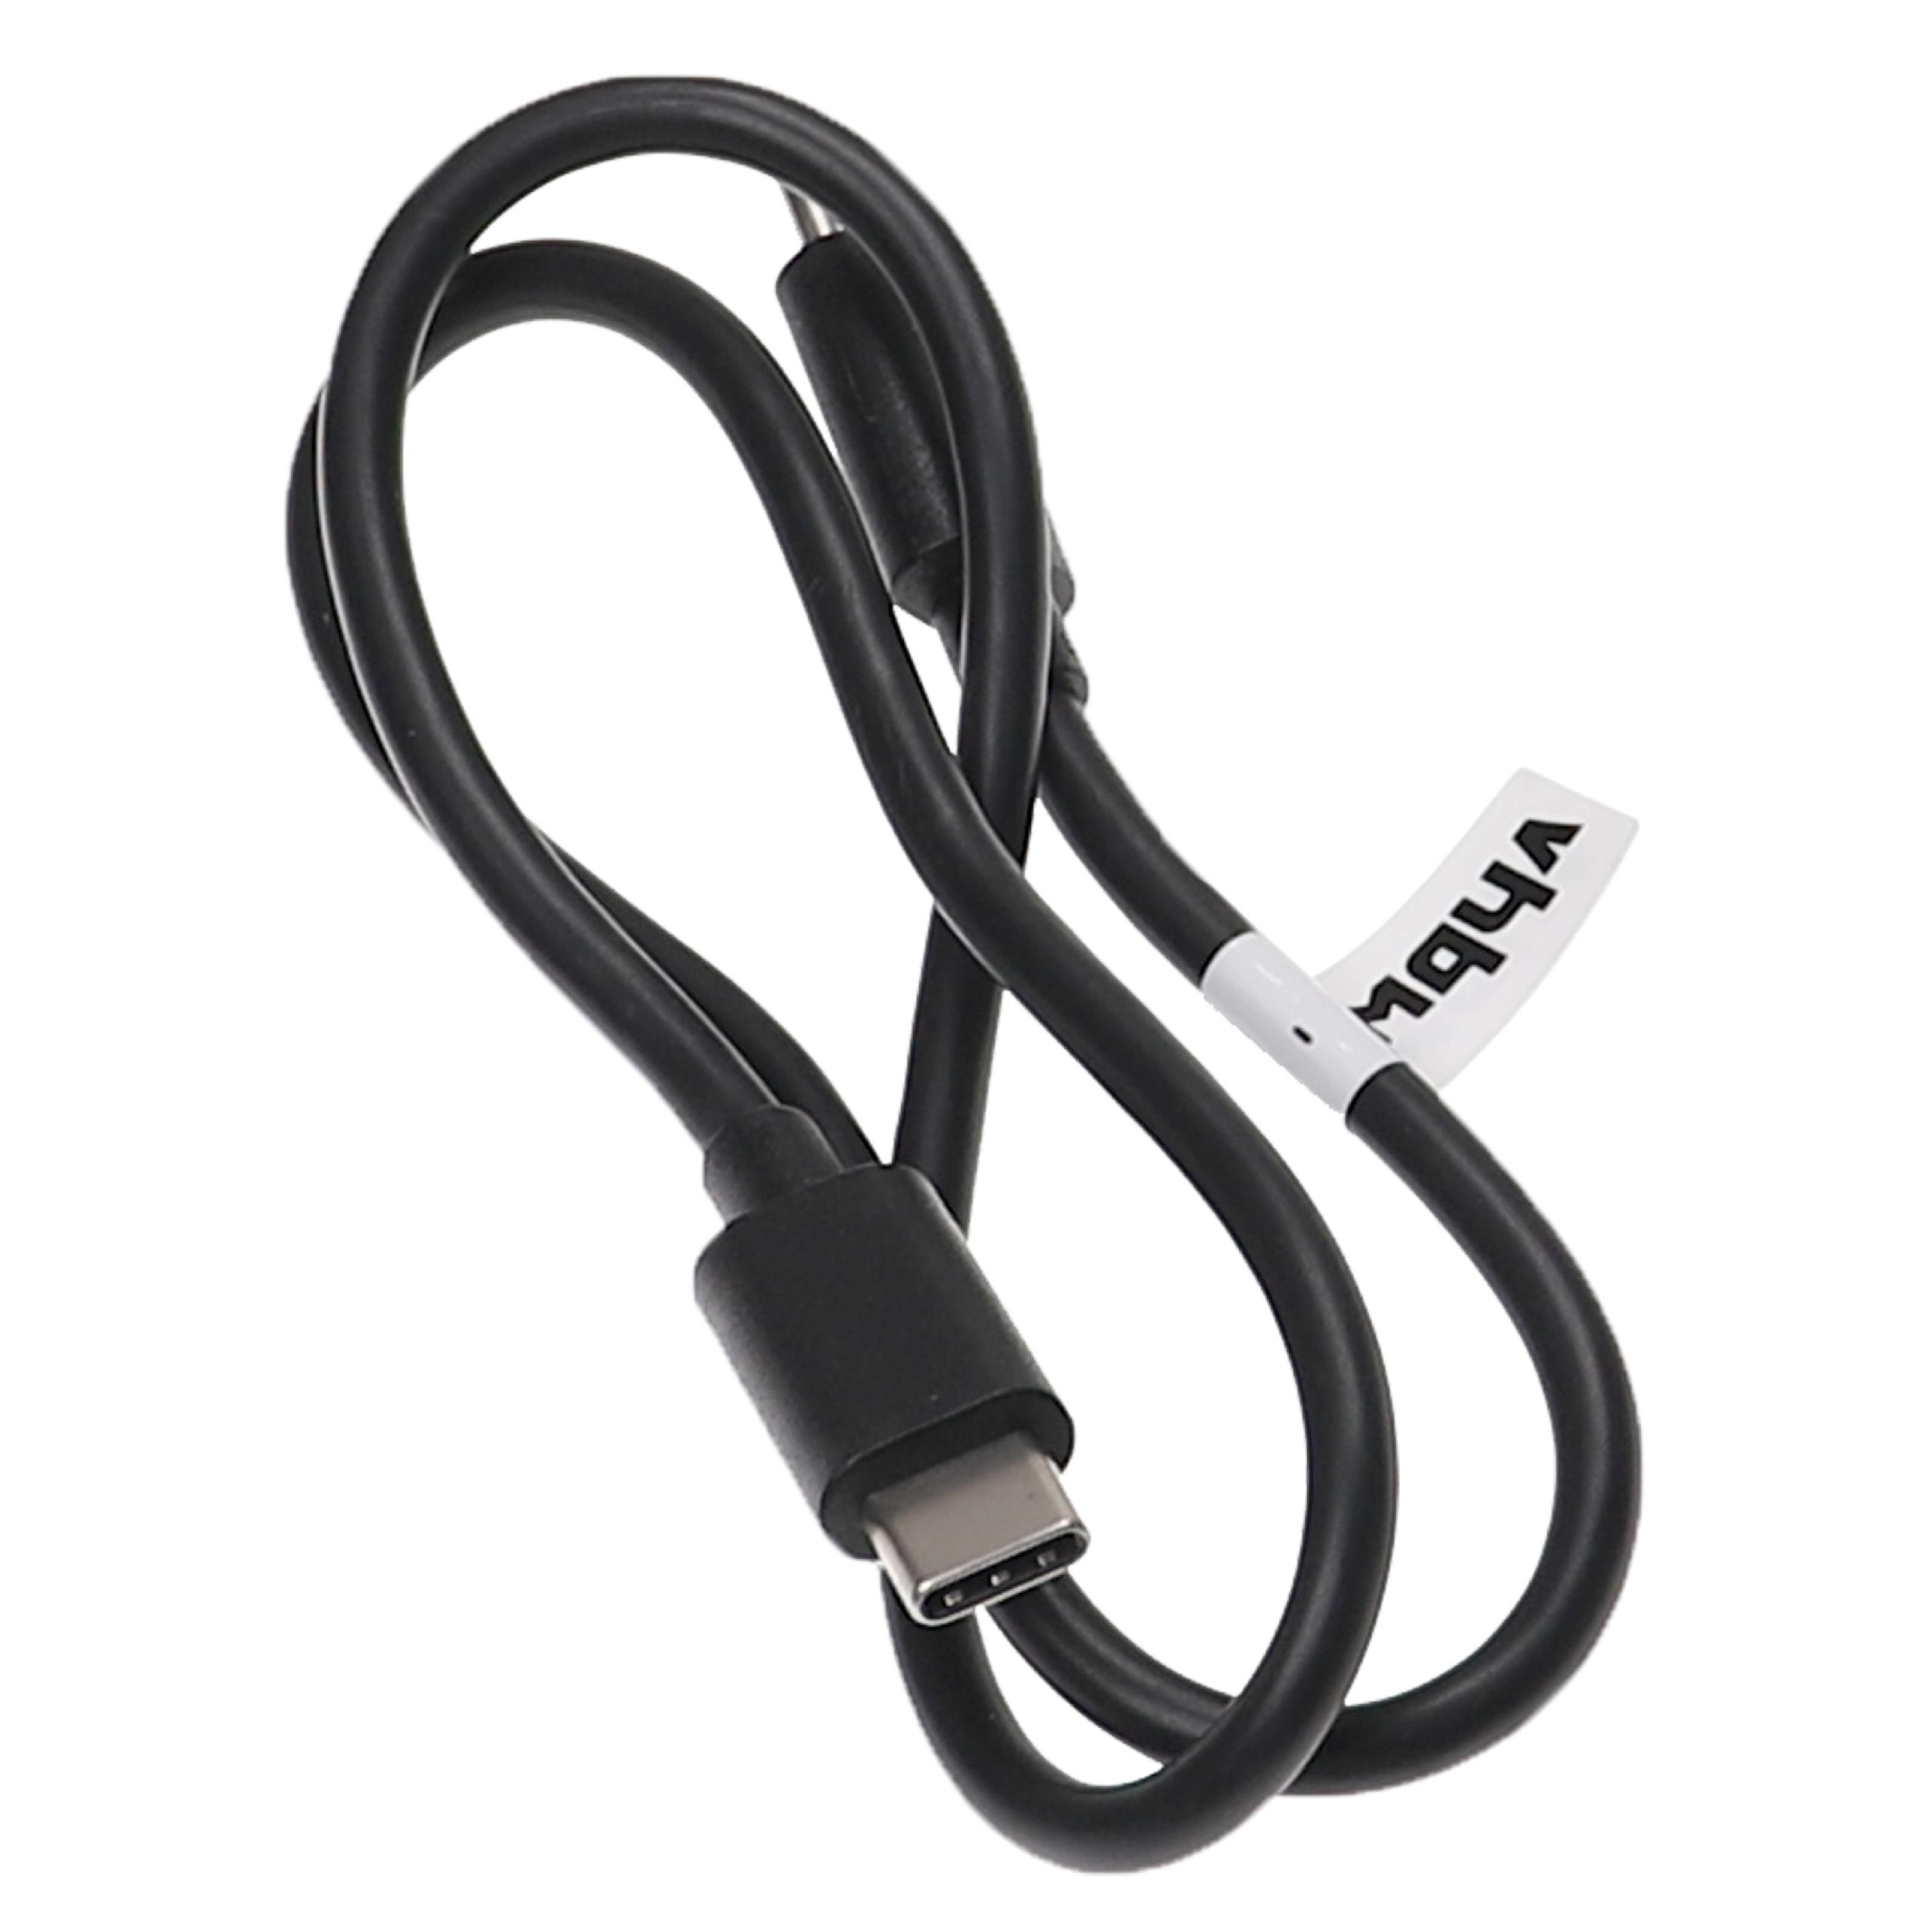 USB Fast Charging Cable suitable for various Laptops, Tablets, Smartphones - USB Cable 50 cm, Black